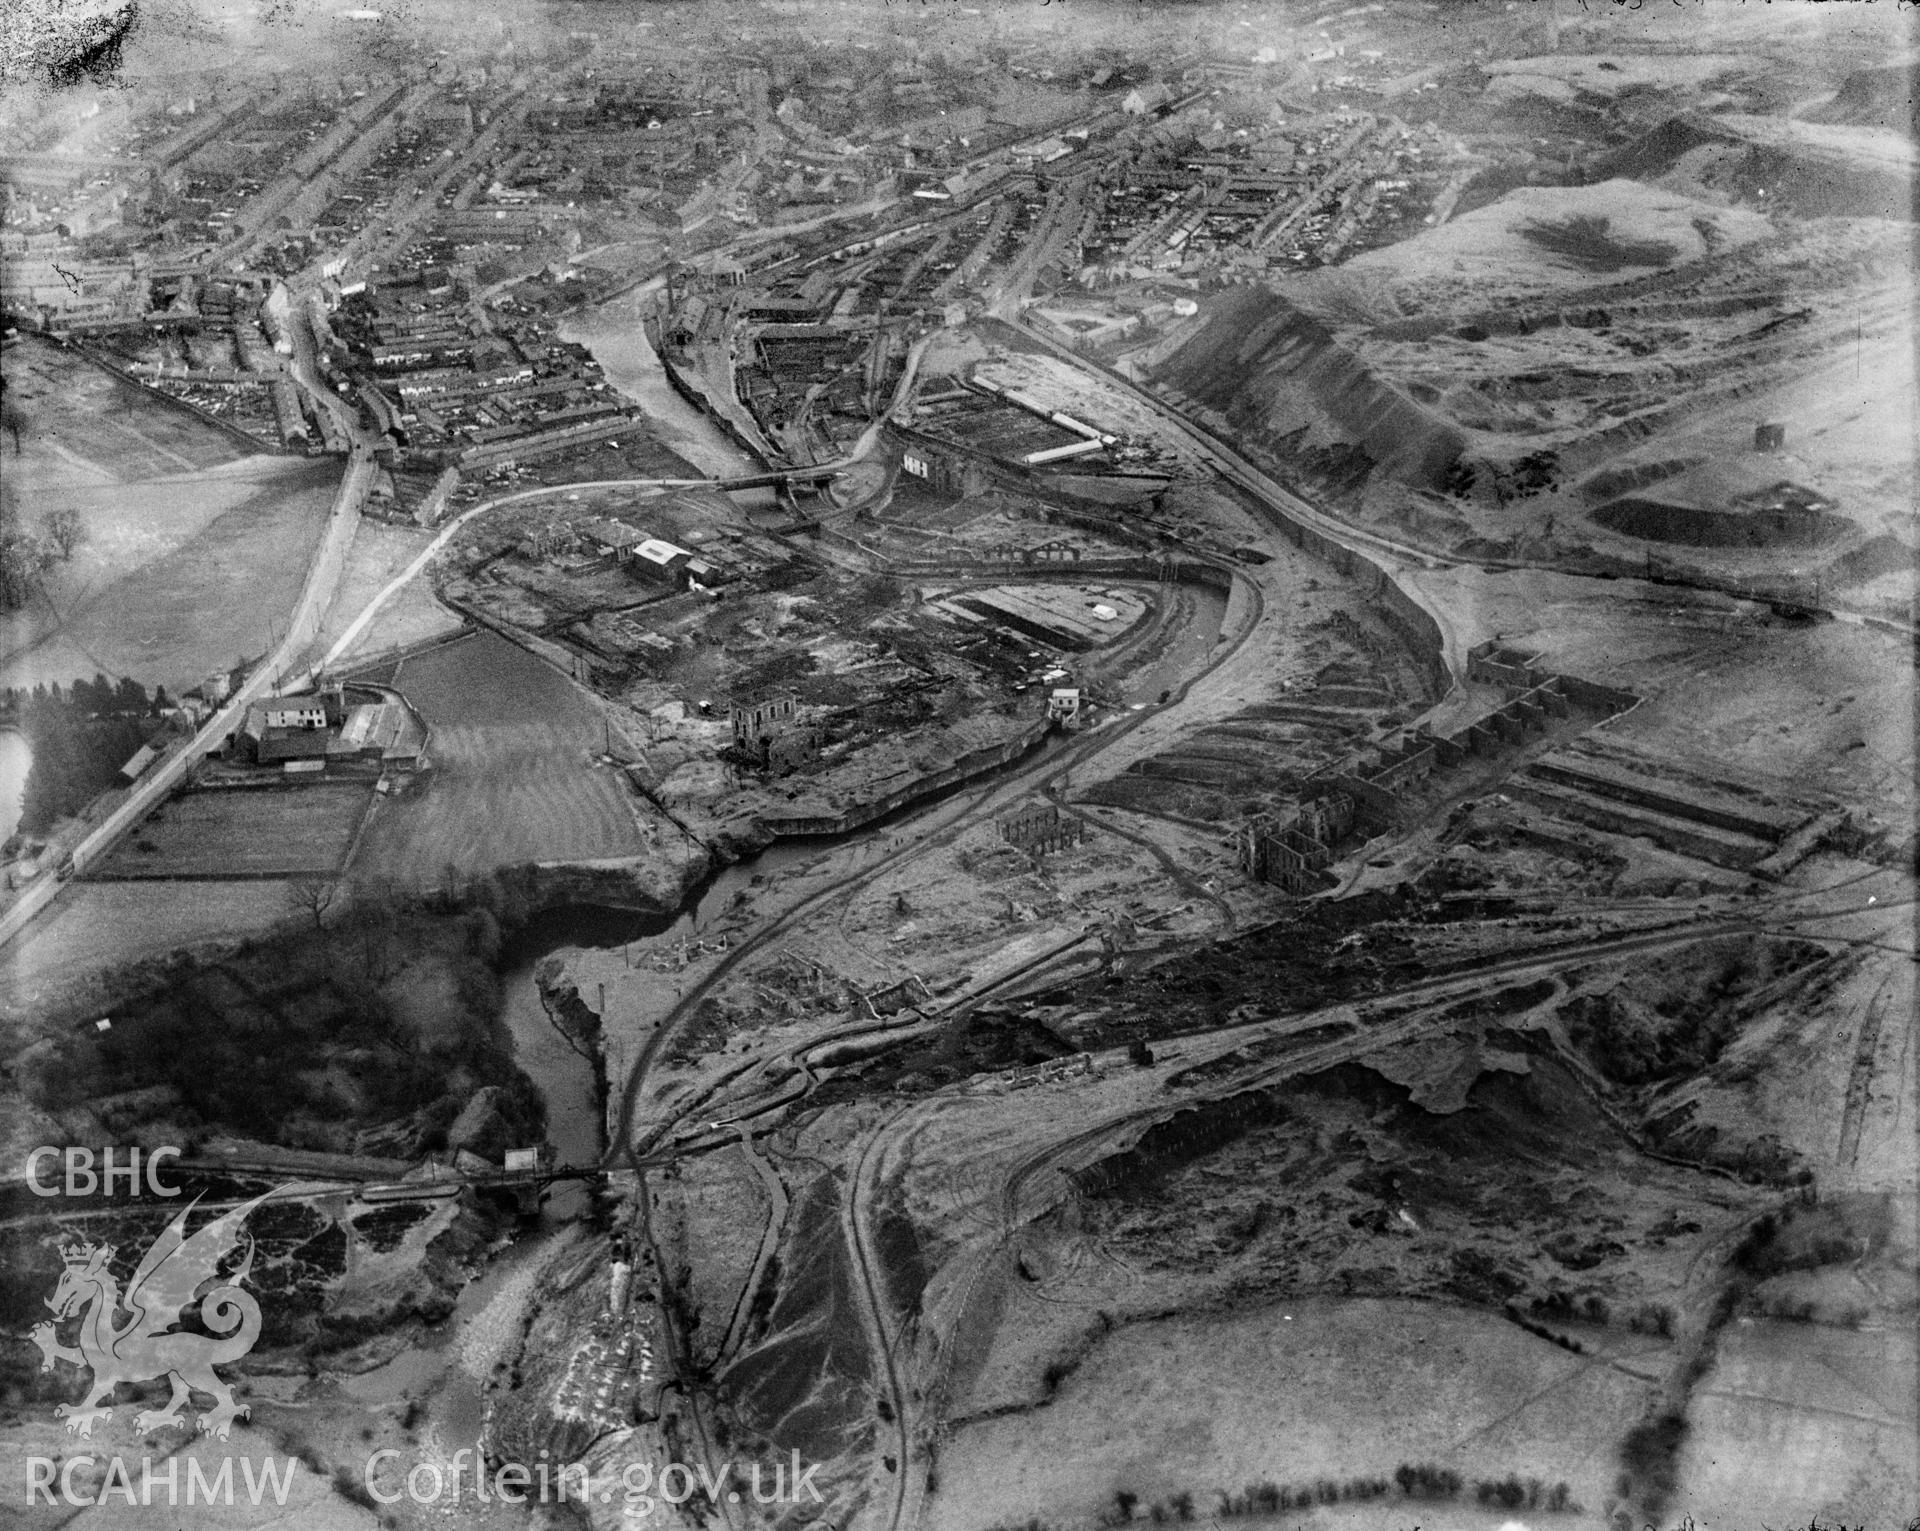 View of Williamstown, Merthyr Tydfil, showing ruined ironworks, oblique aerial view. 5?x4? black and white glass plate negative.